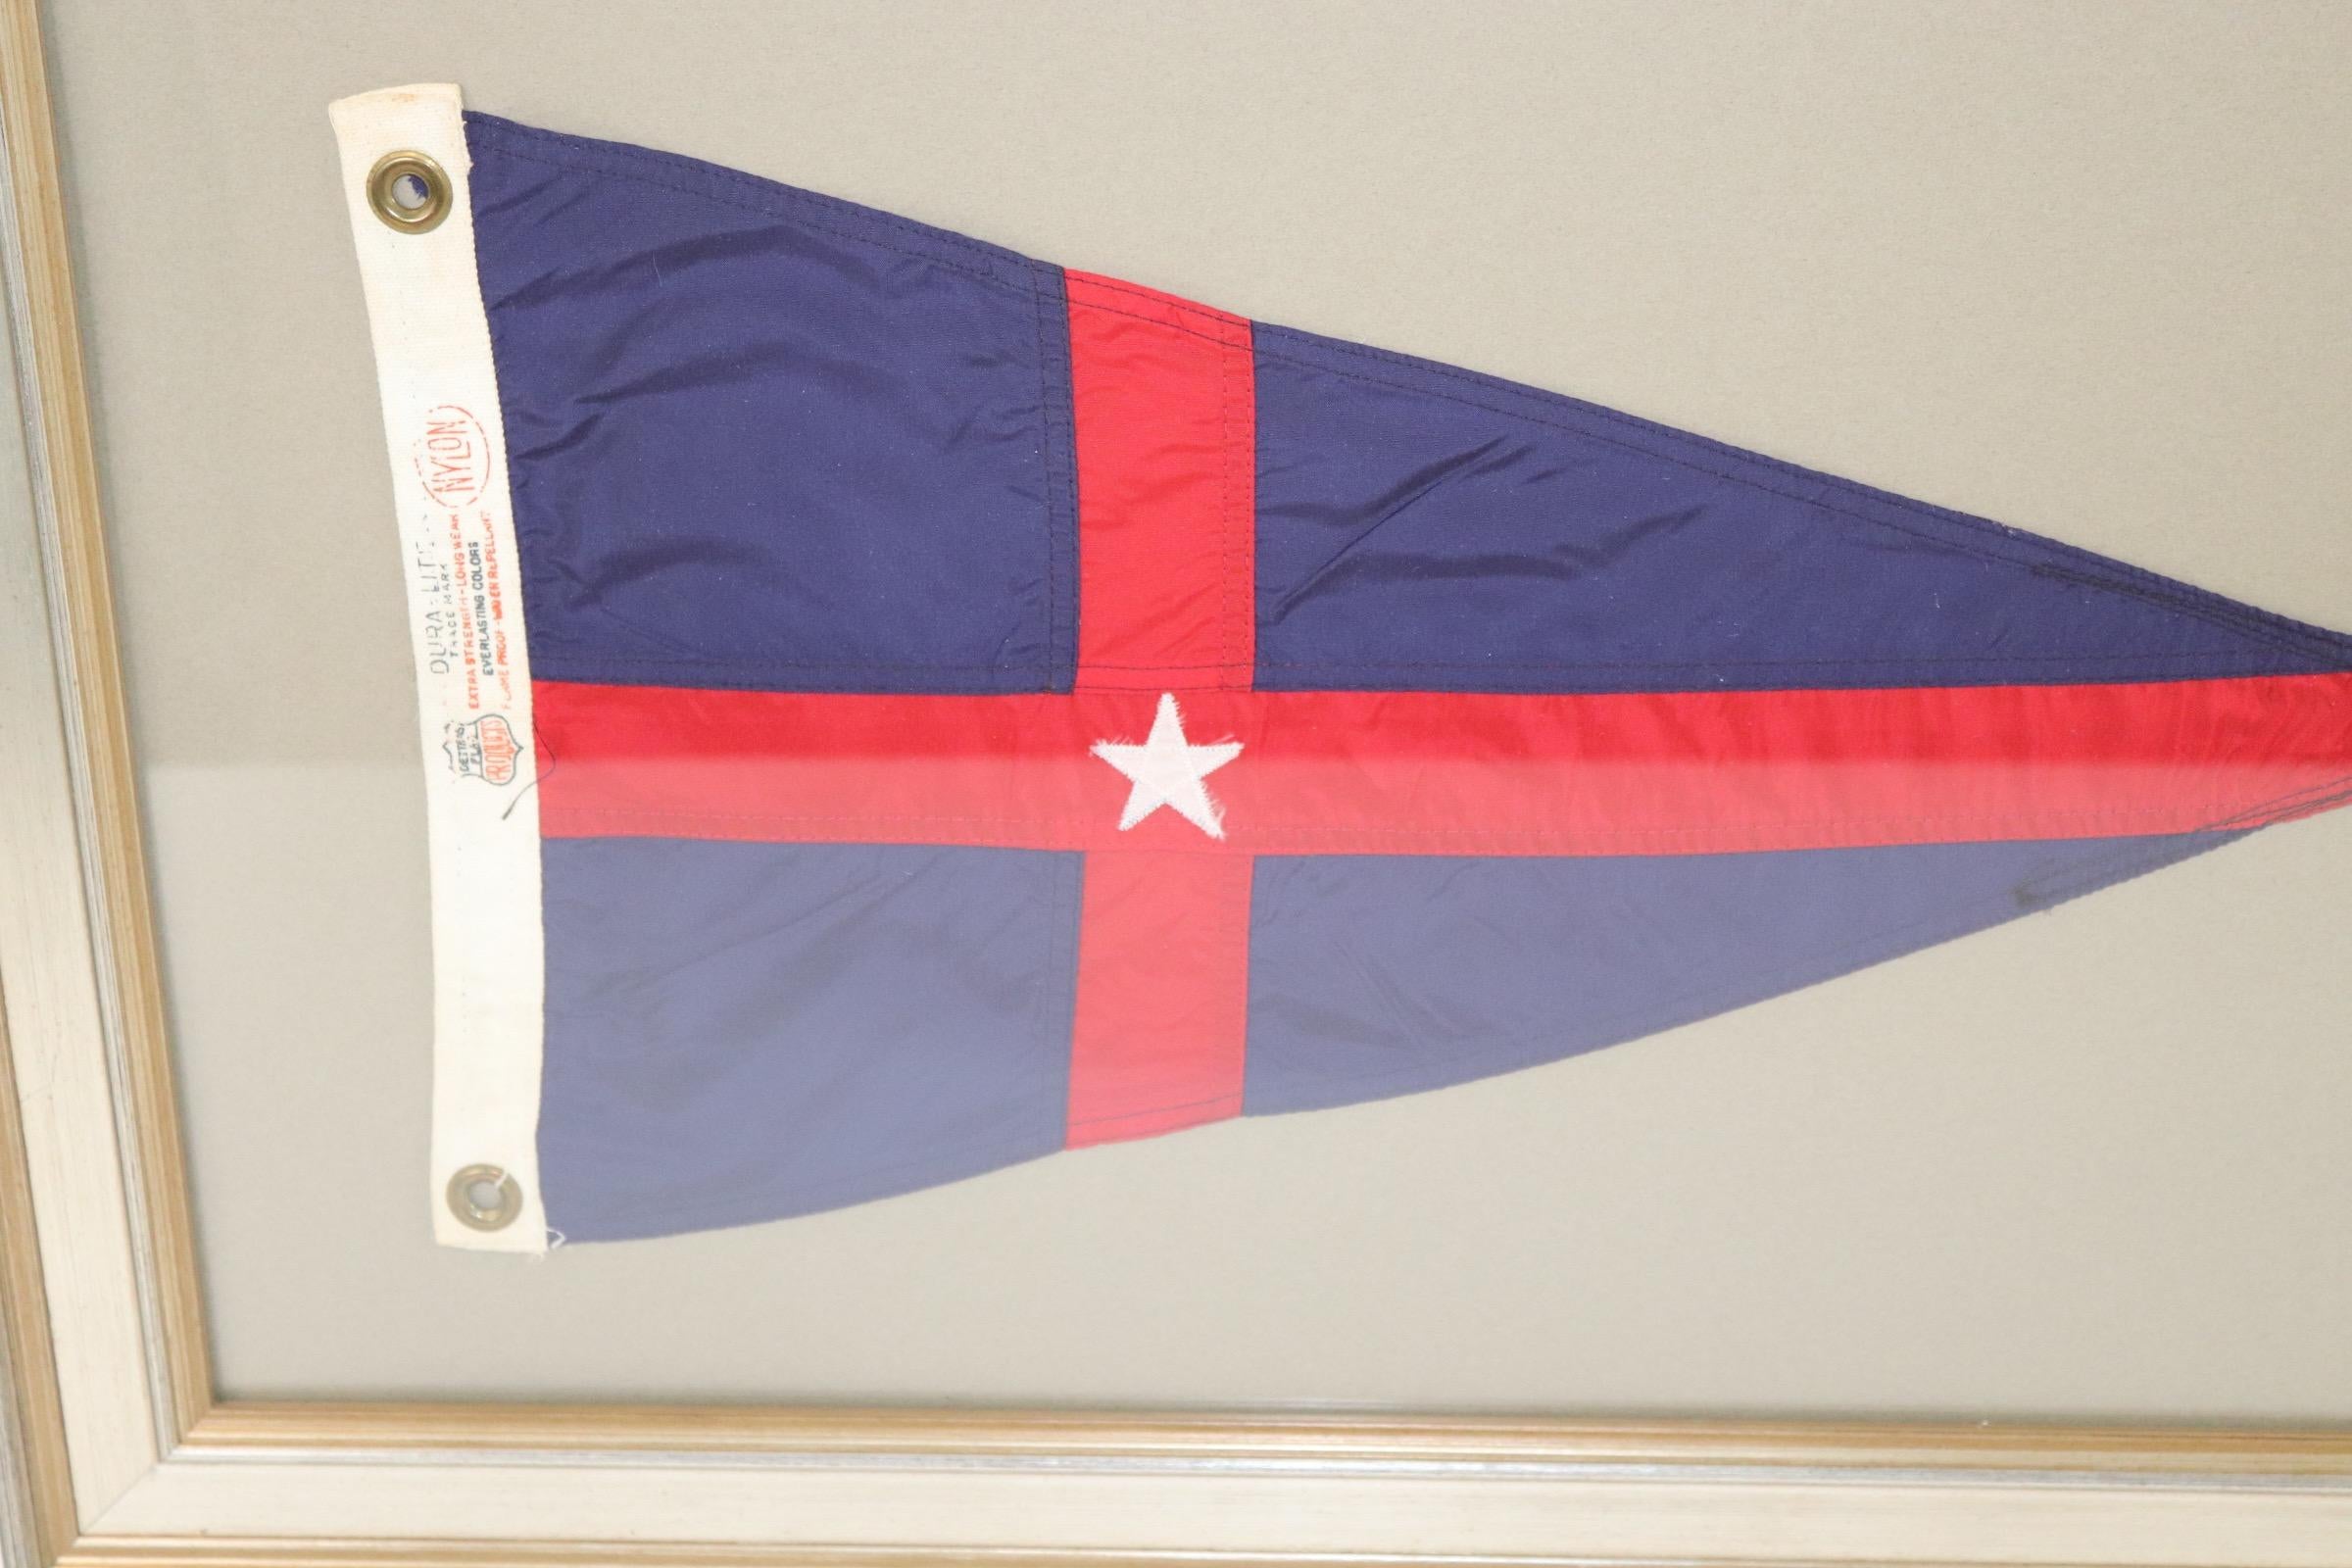 Framed New York Yacht club burgee. With NYYC logo of white star over blue field with red stripes. Weight is 8 pounds.